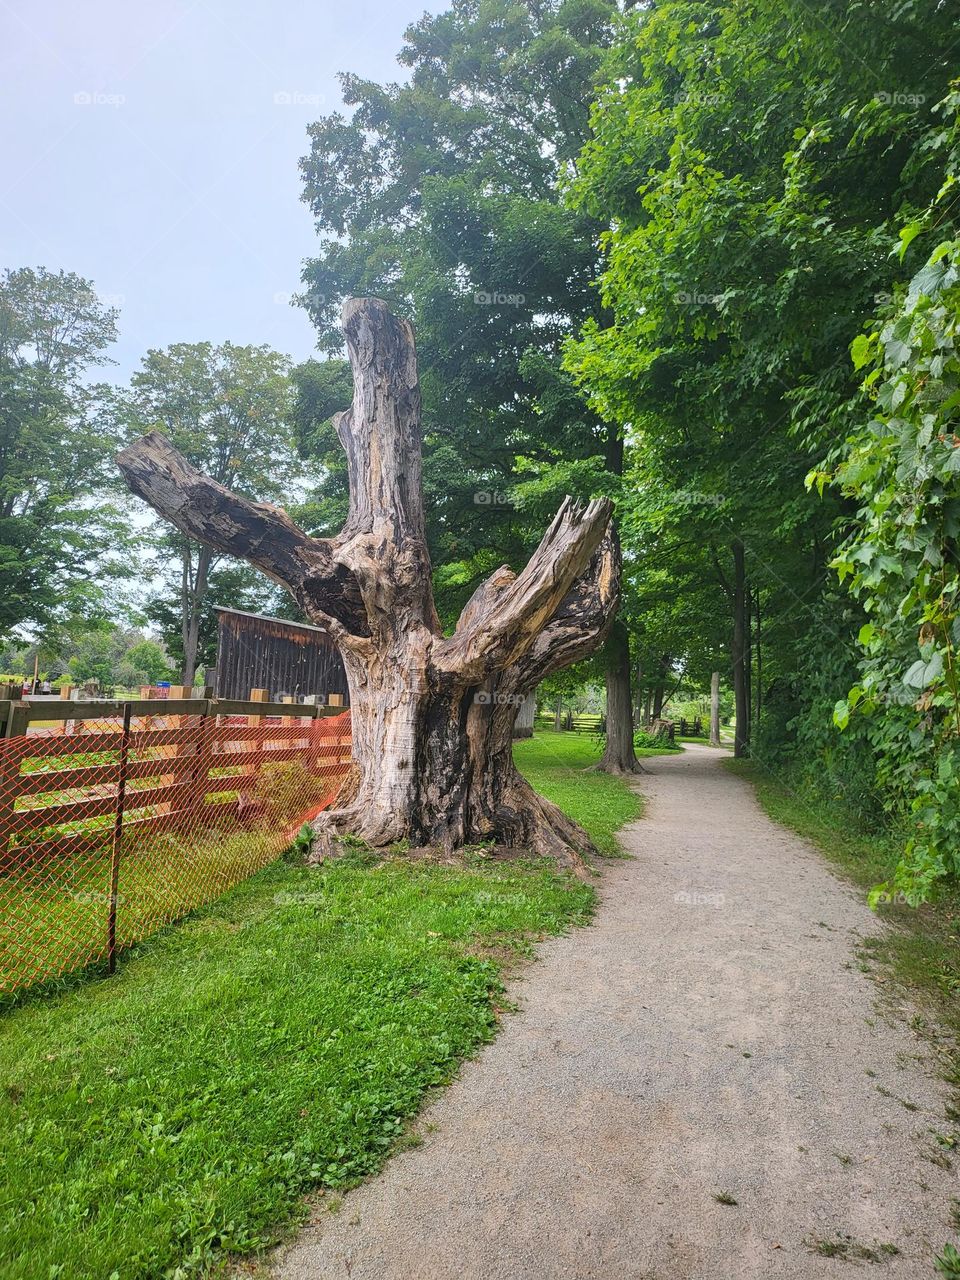 park, trees, old trees, tree trunk, fence, pathway, forest, scenic, greenery, roadtrip, wildlife, old tree, big tree trunk, farm, trail, forest trail, farm land, canadian parks, recreation, summer, fun, day trip, sunny, tree branches, old oak, land